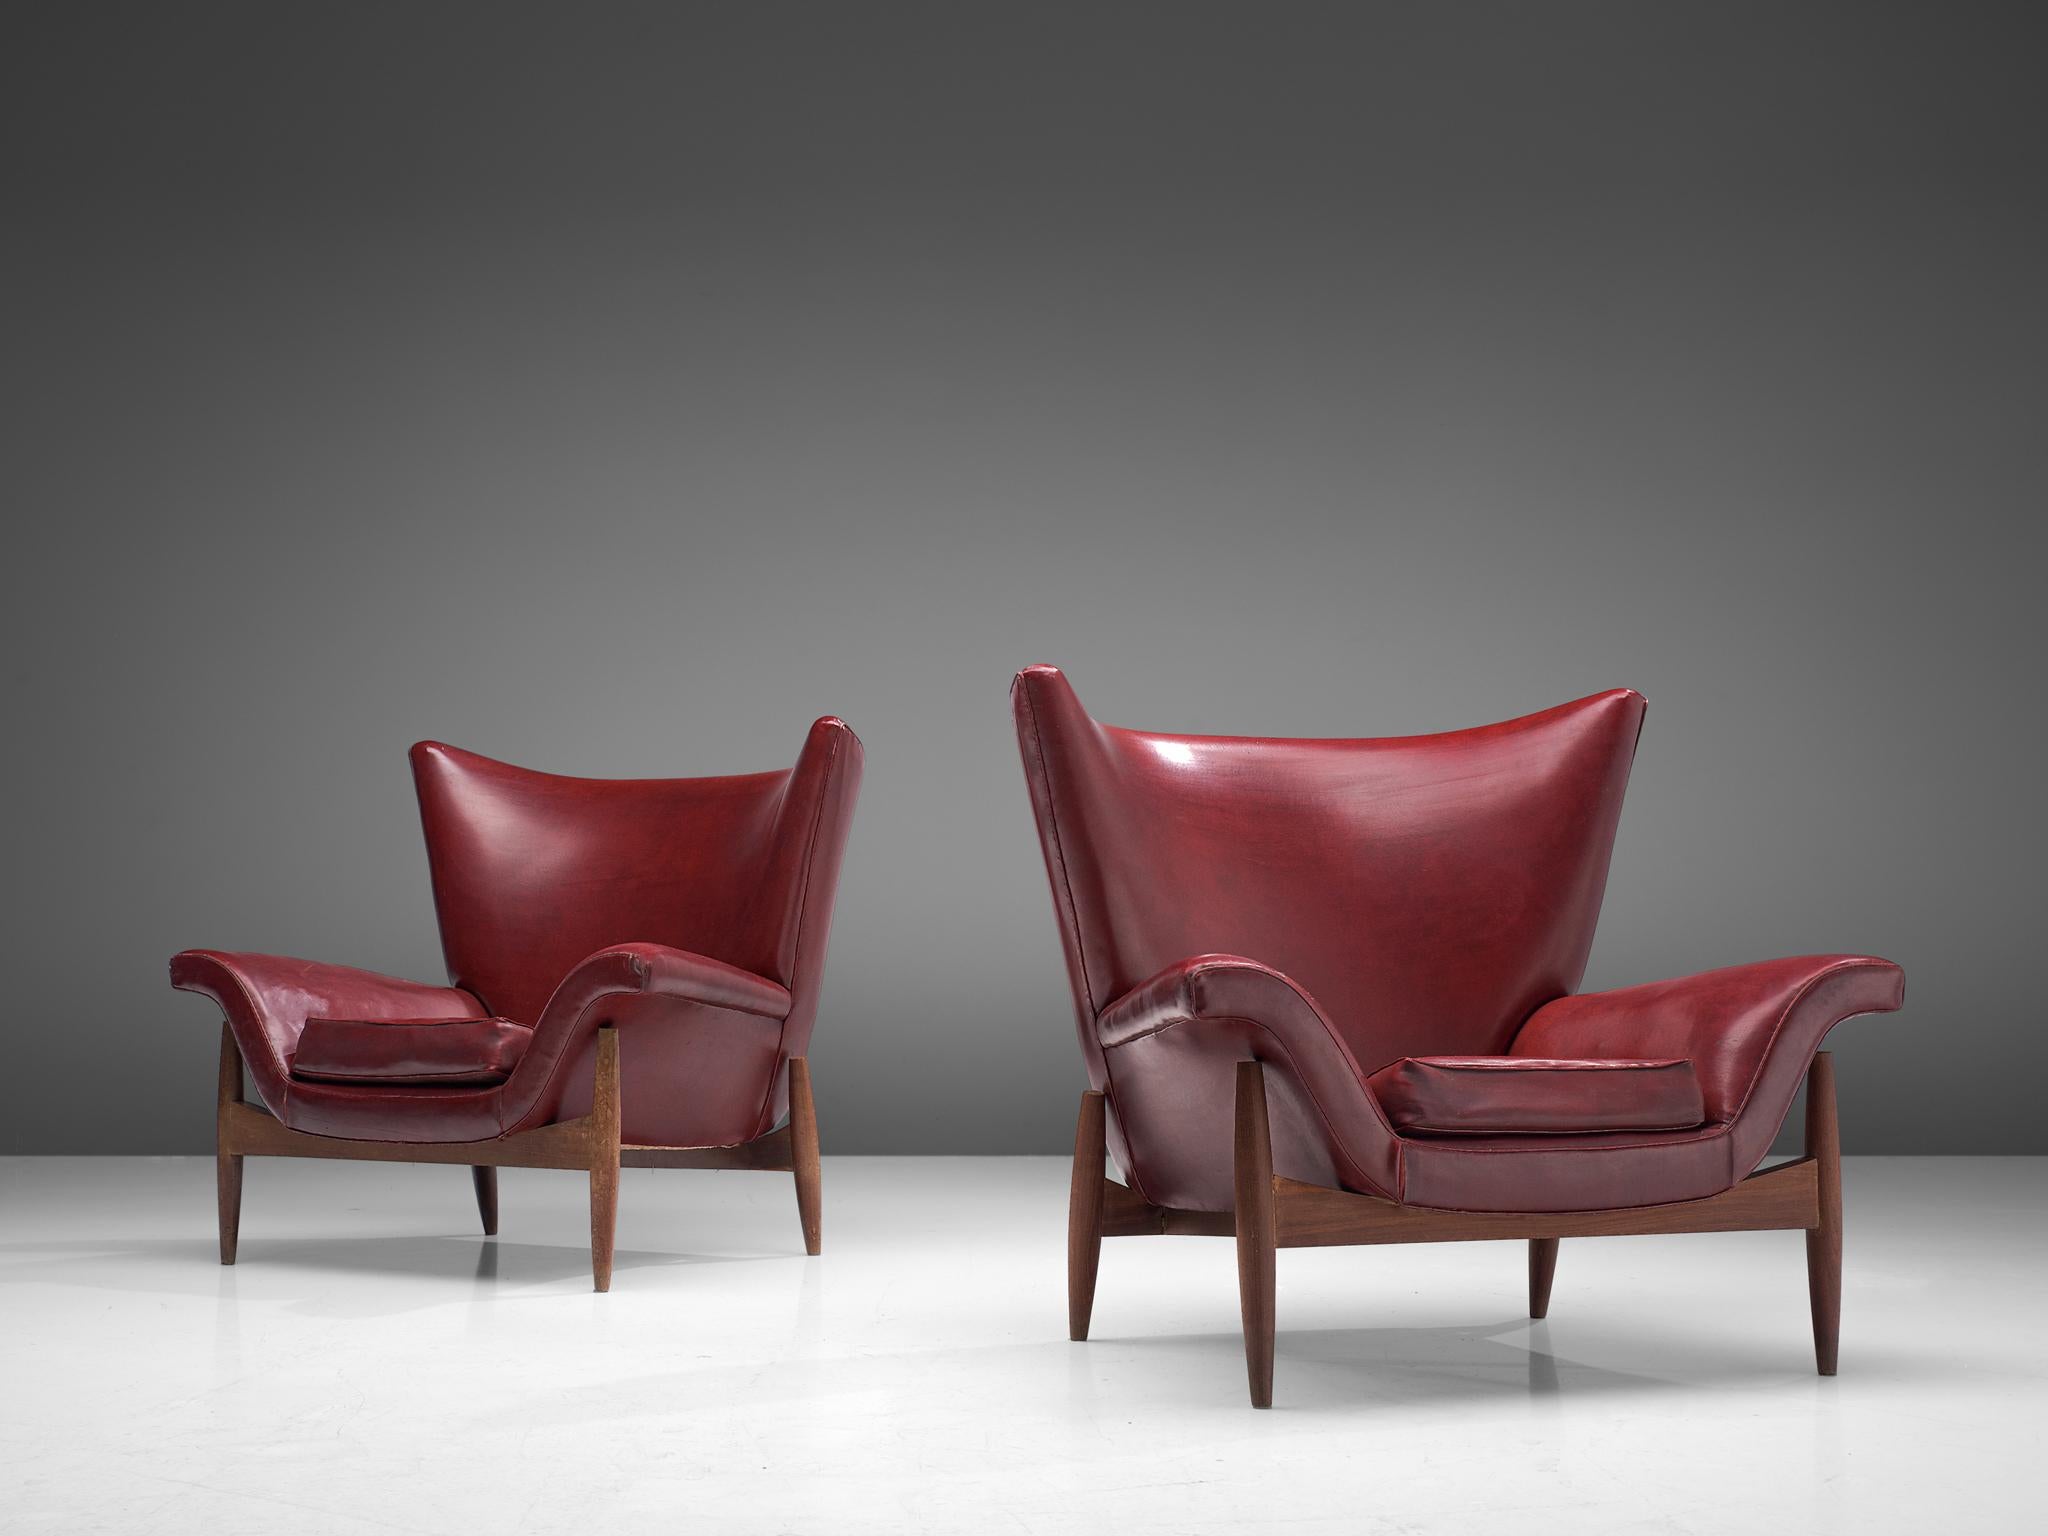 Pair of wingback chairs, leatherette, wood, Italy, 1960s

A stunning pair of Italian lounge chairs, characterized by their large, curved backs and the pointy edges. The corners of the backrests point upwards, giving these chairs a theatrical look.